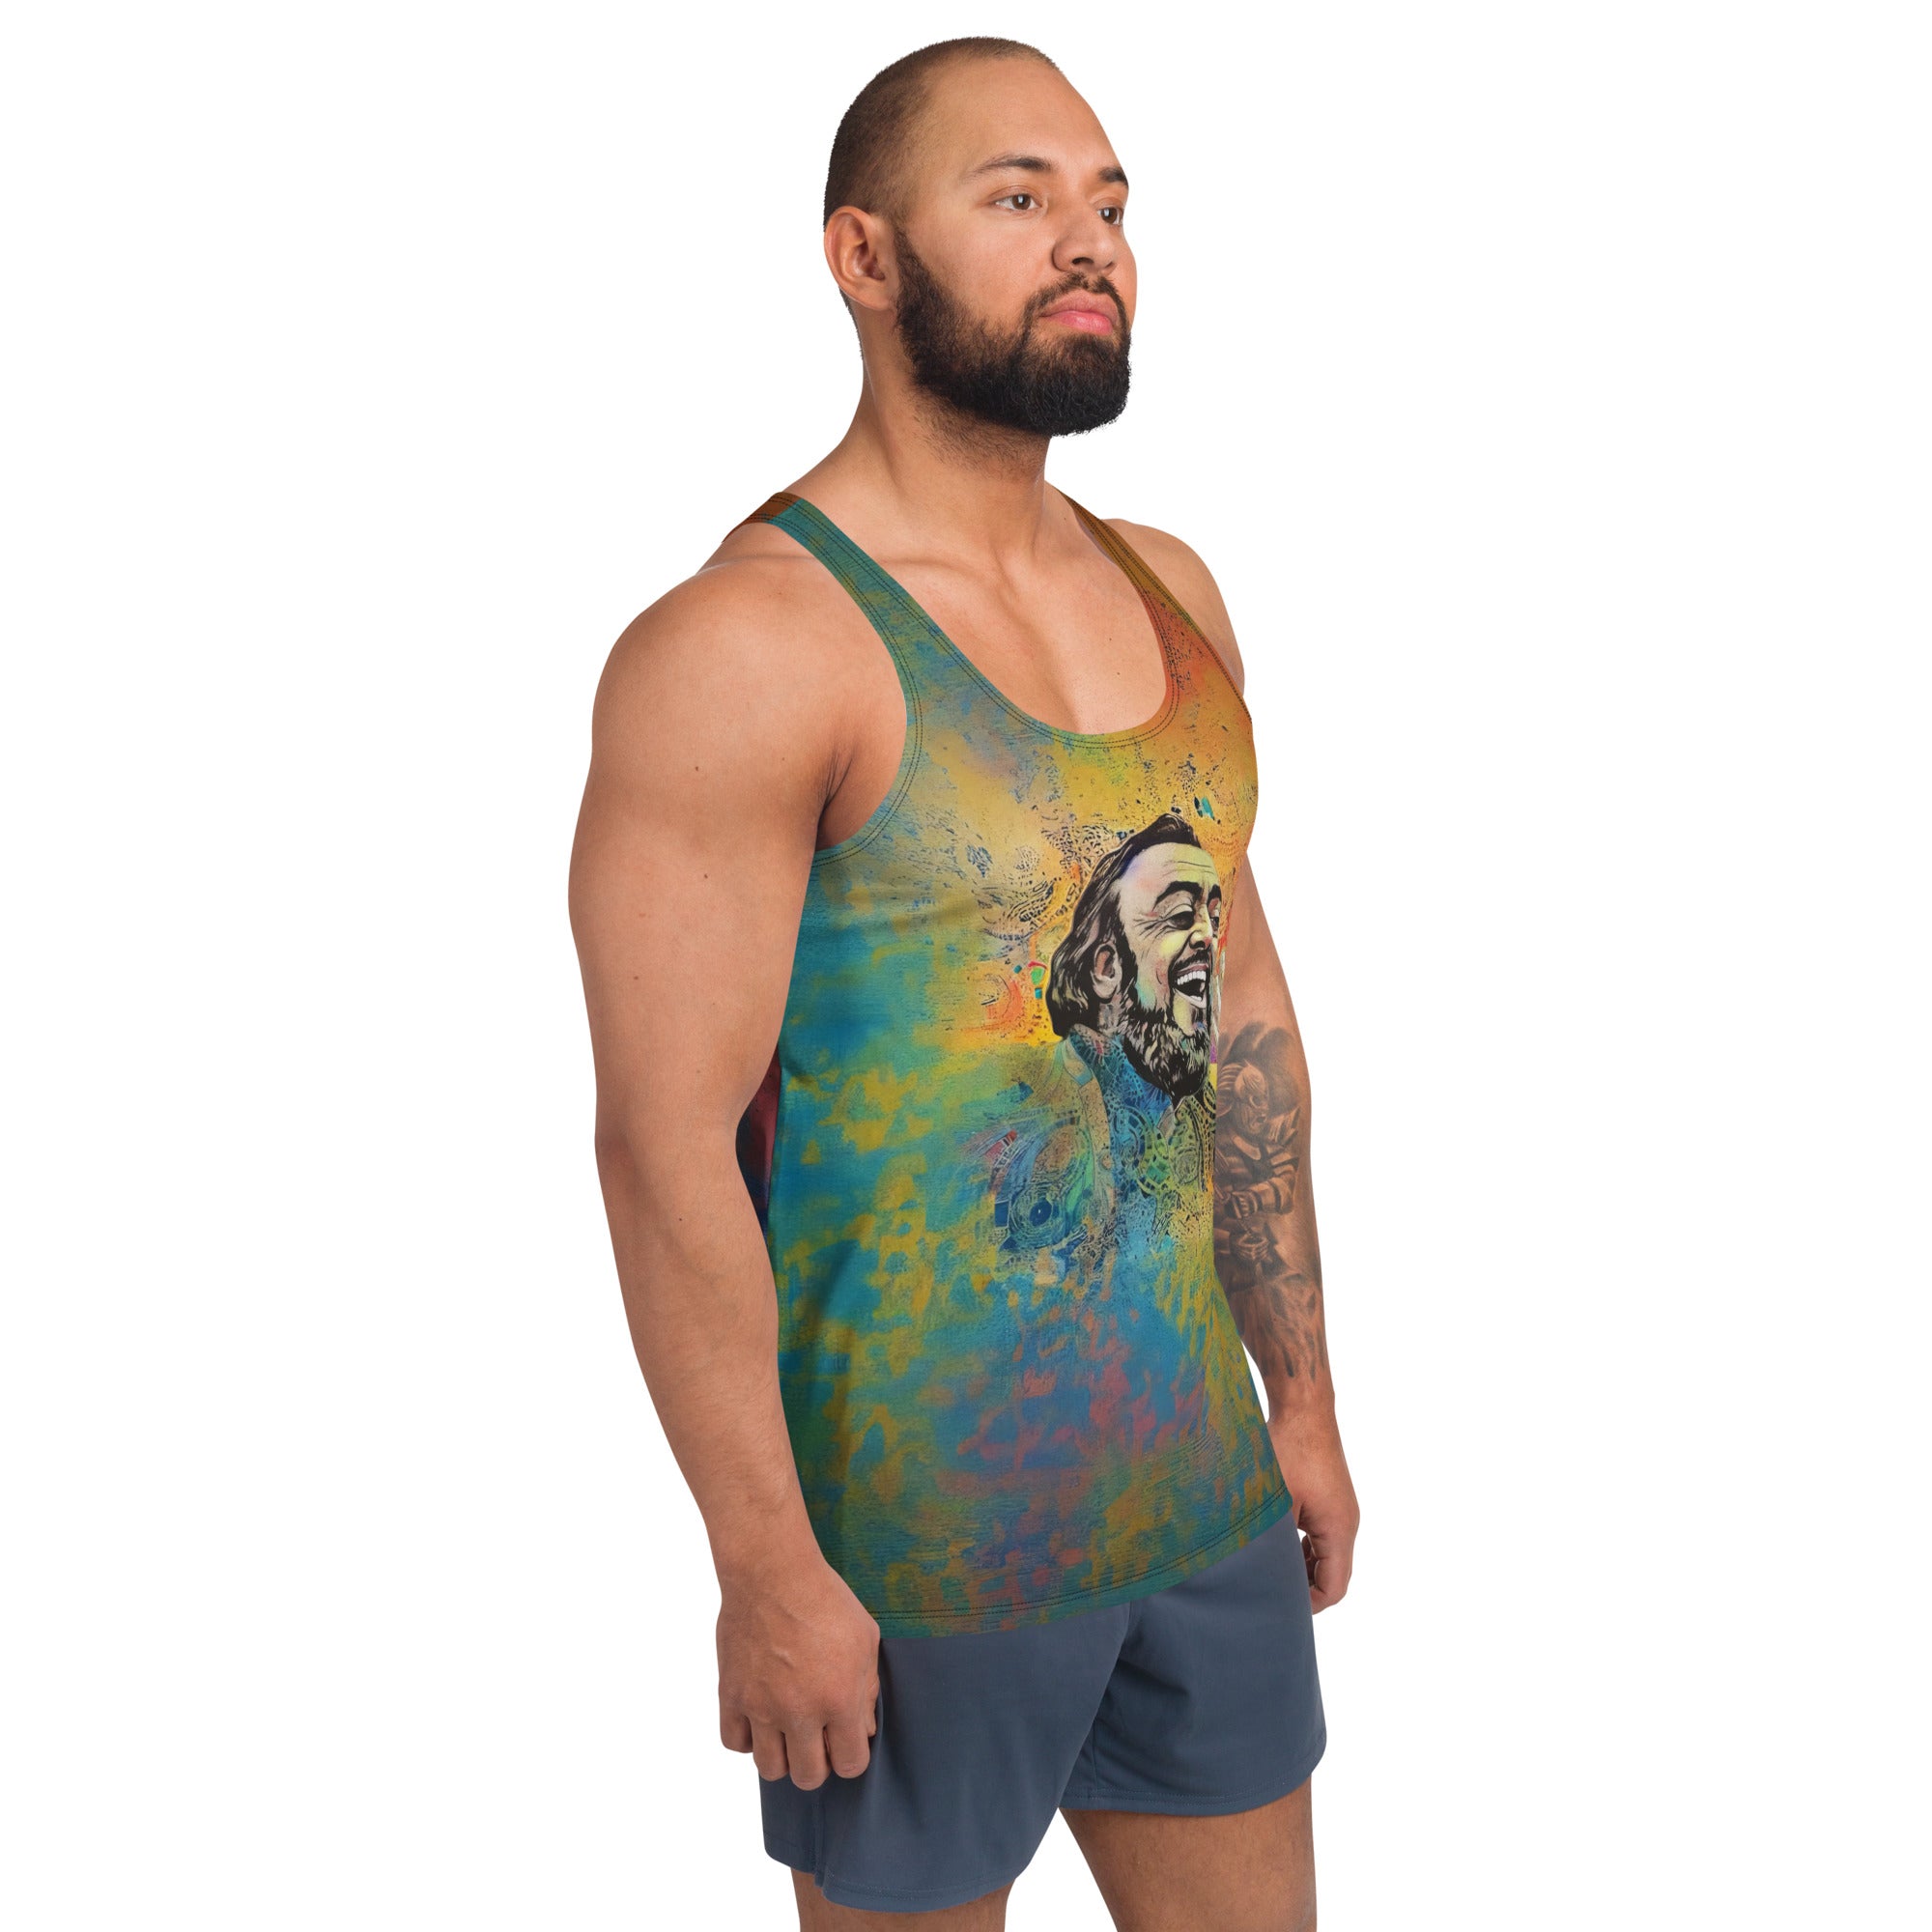 Model wearing the Floral Fantasy Men's Tank Top outdoors.